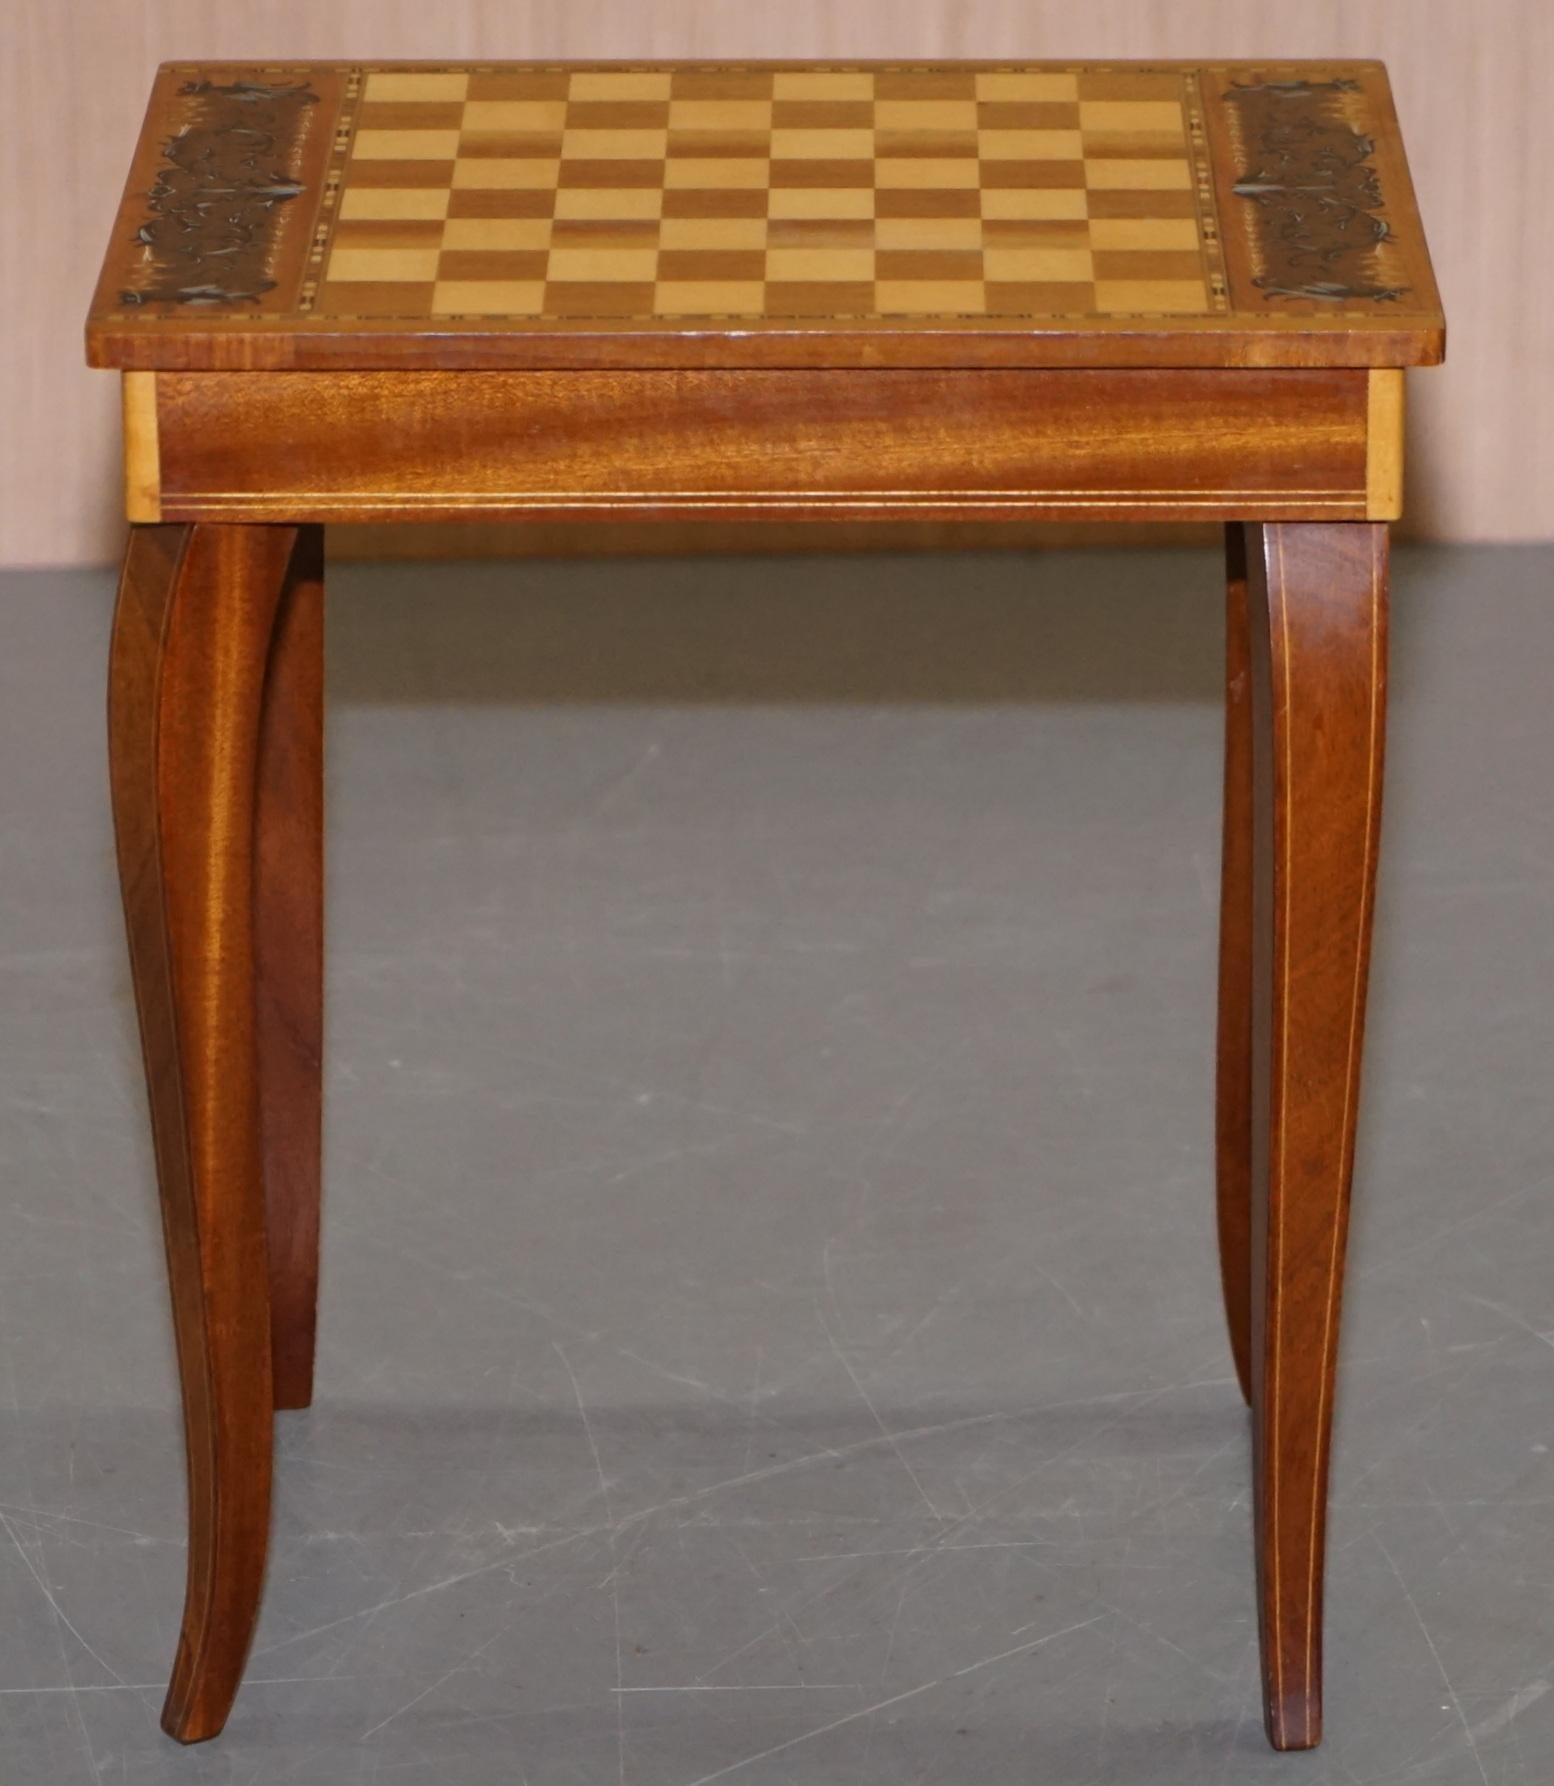 20th Century Lovely Small Musical Chess Backgammon Games Table with Drawer and Chess Pieces